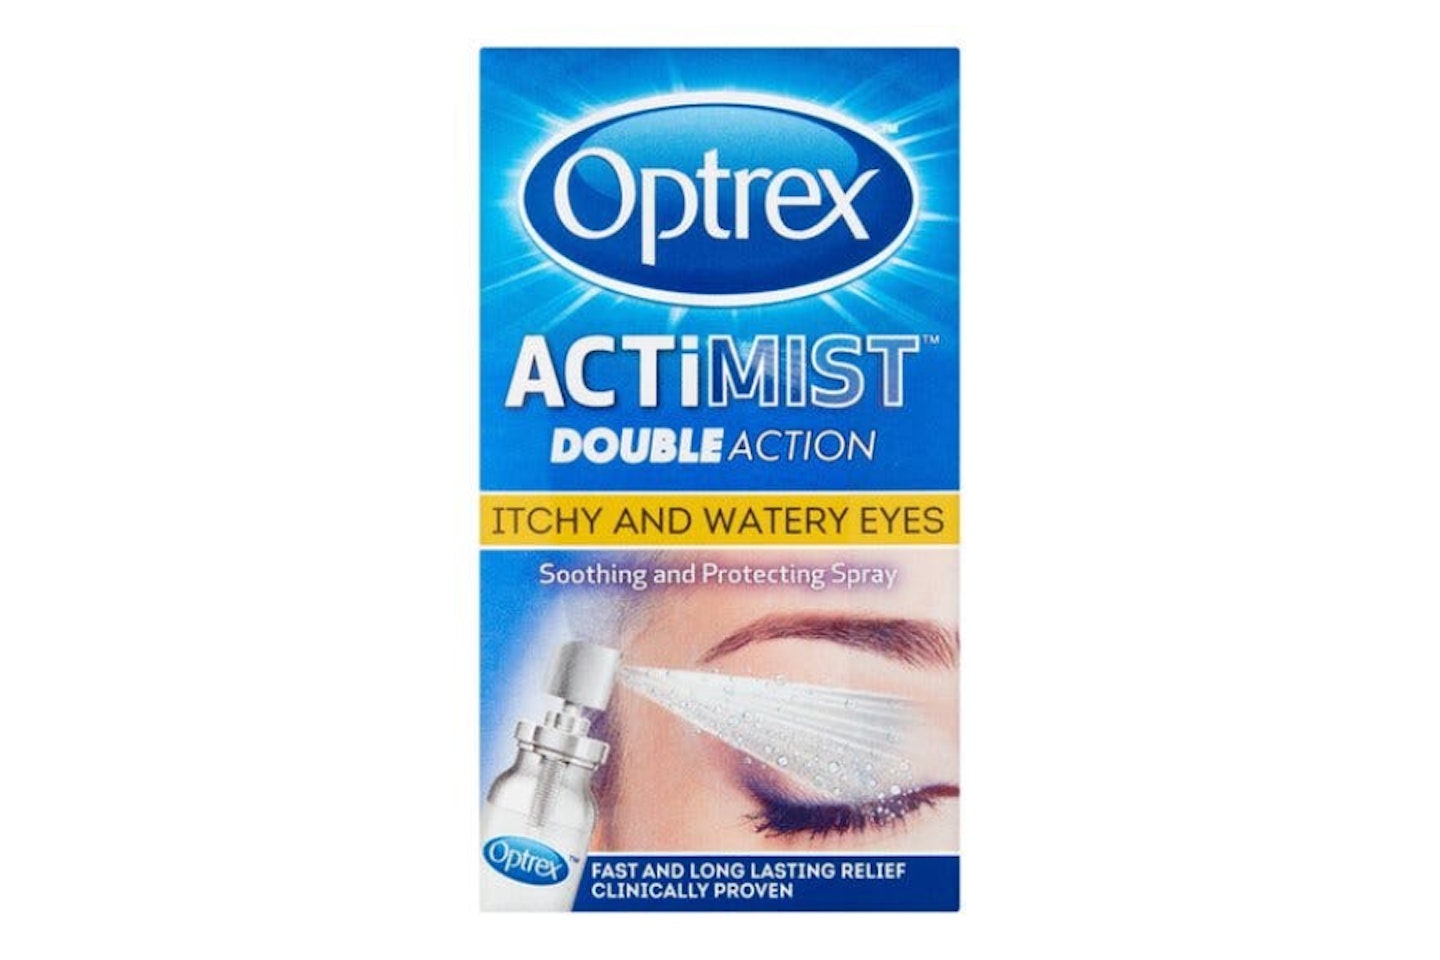 Optrex Actimist Double Action for Itchy & Watery Eyes - 10ml- one of the best hay fever eye drops